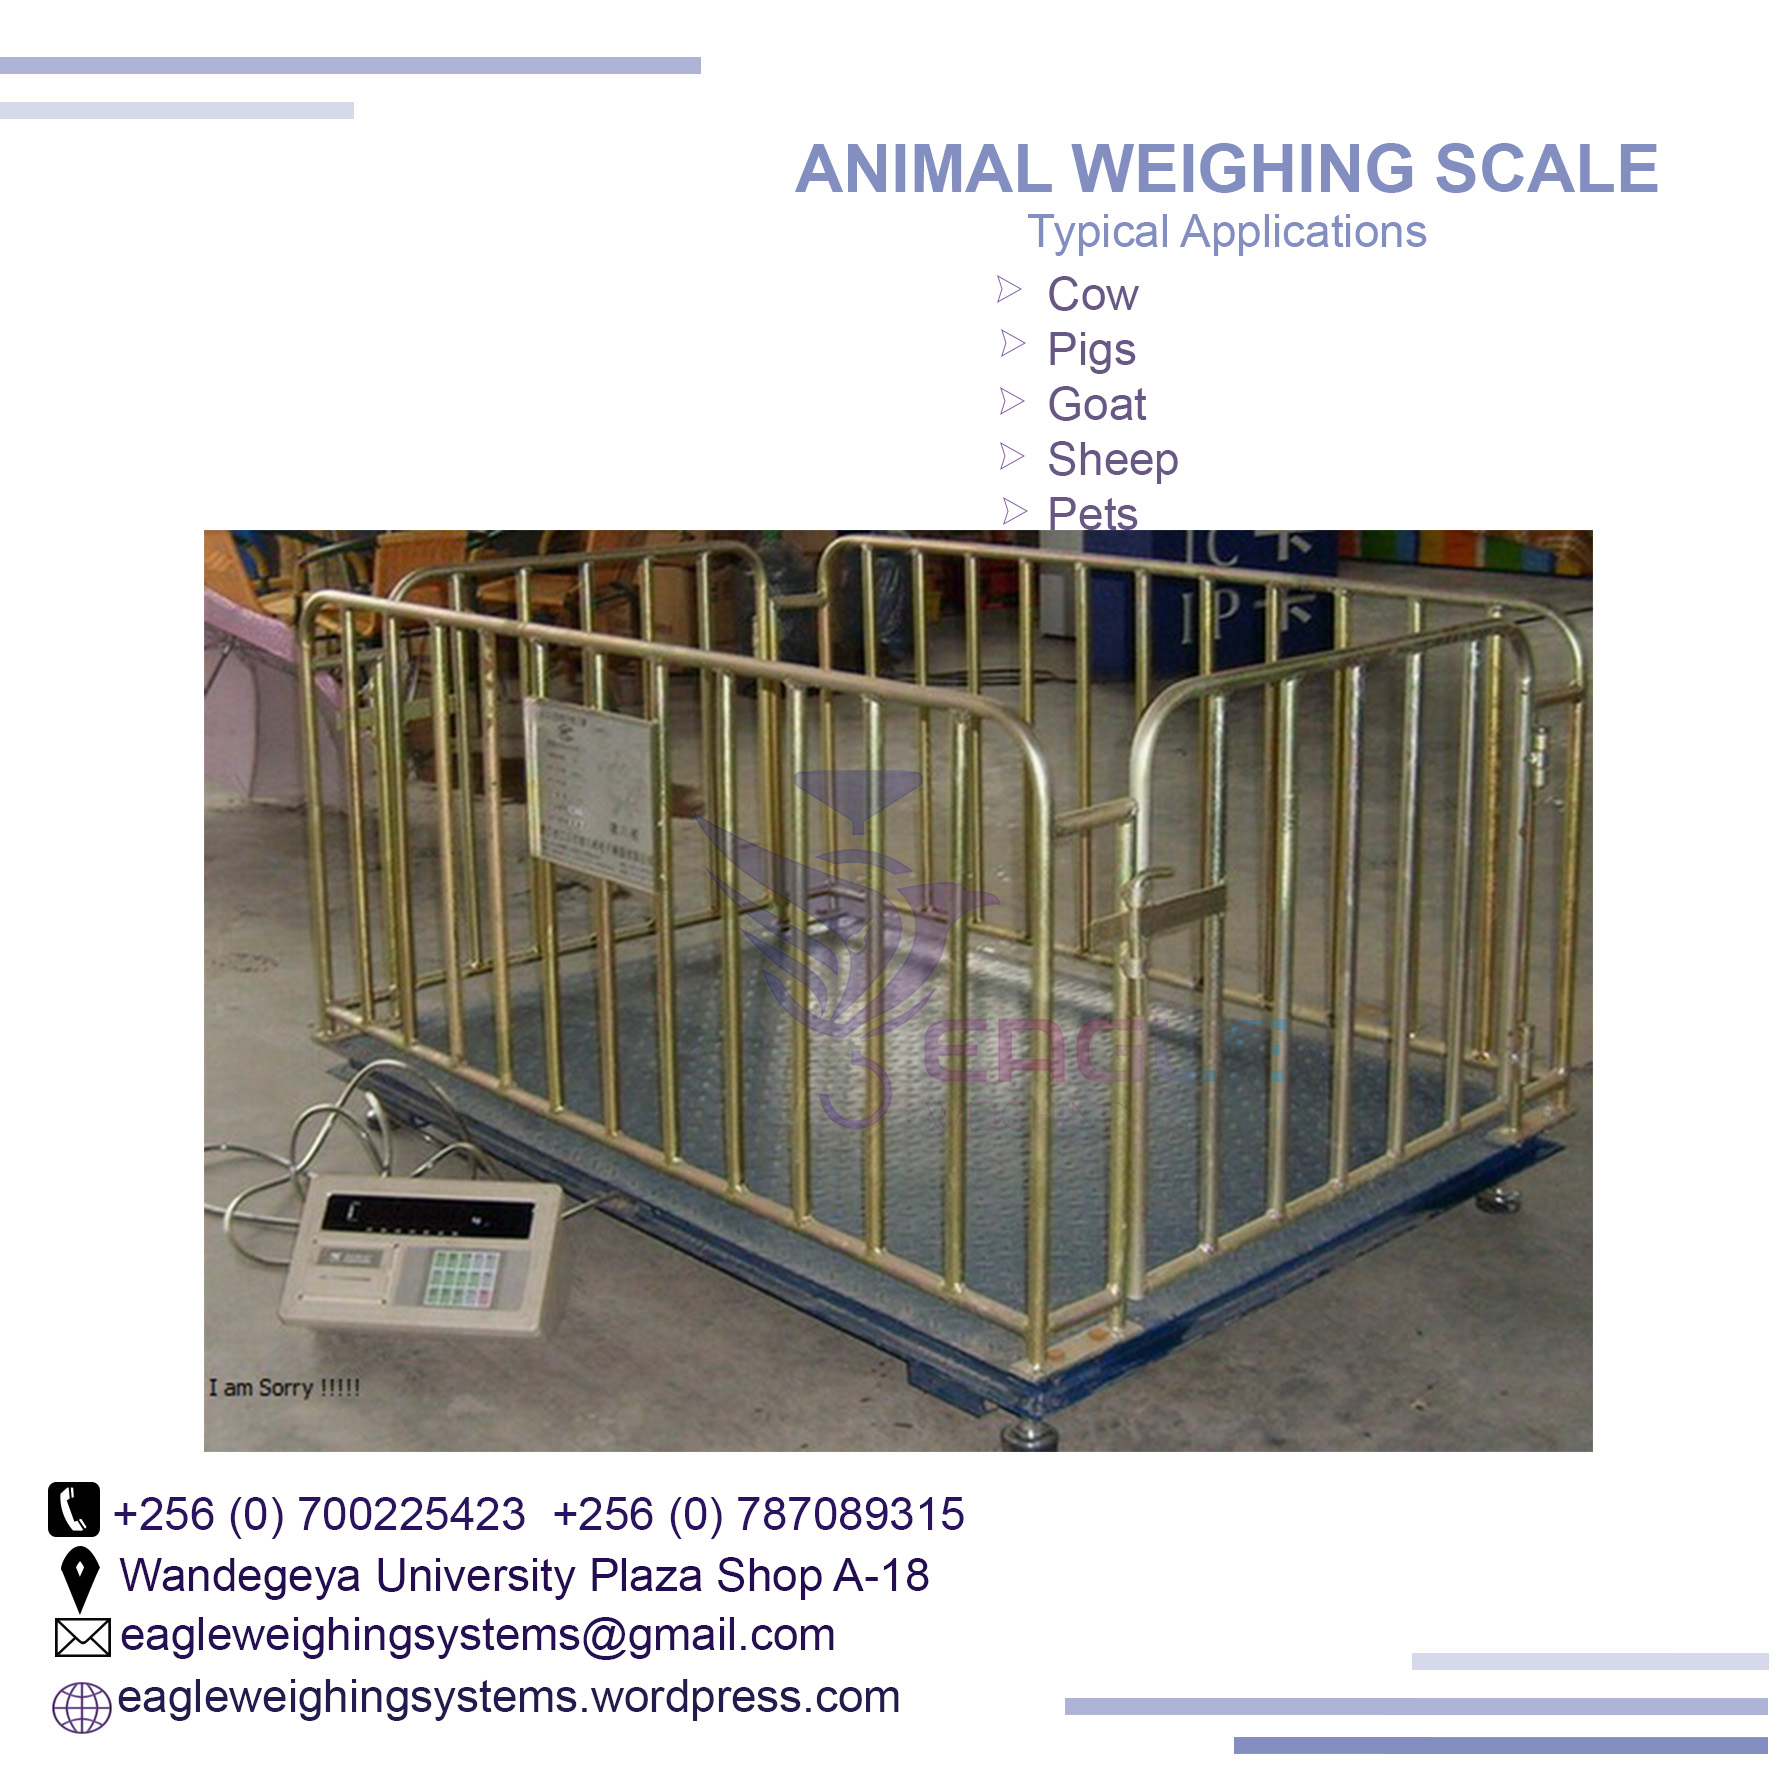 Livestock animal Weighing floor scales at Eagle Weighing sy'